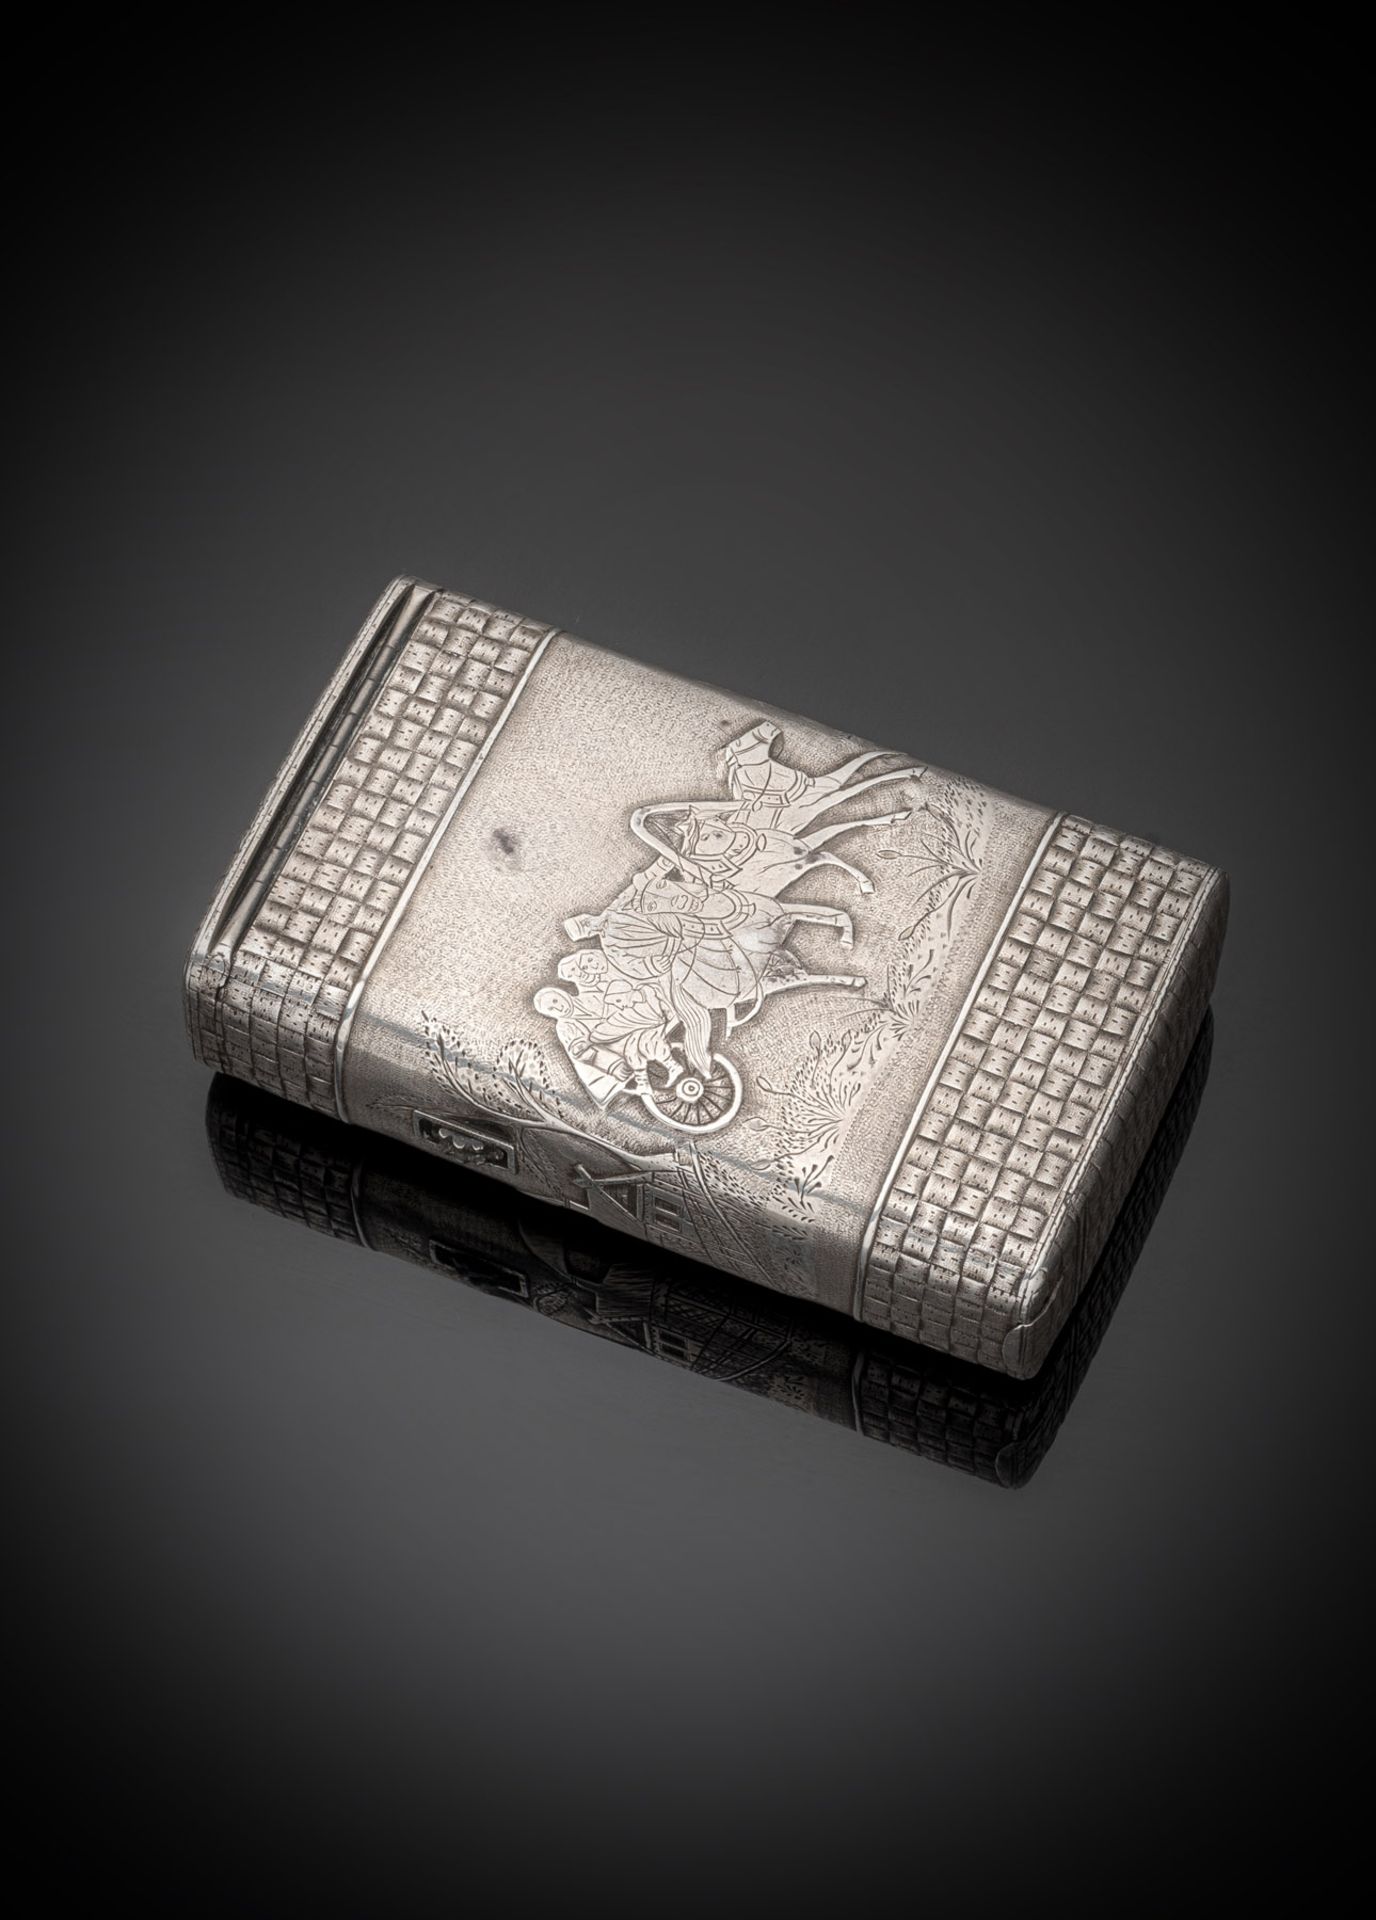 A RUSSIAN SILVER CIGAR CASE WITH TROIKA - Image 2 of 4